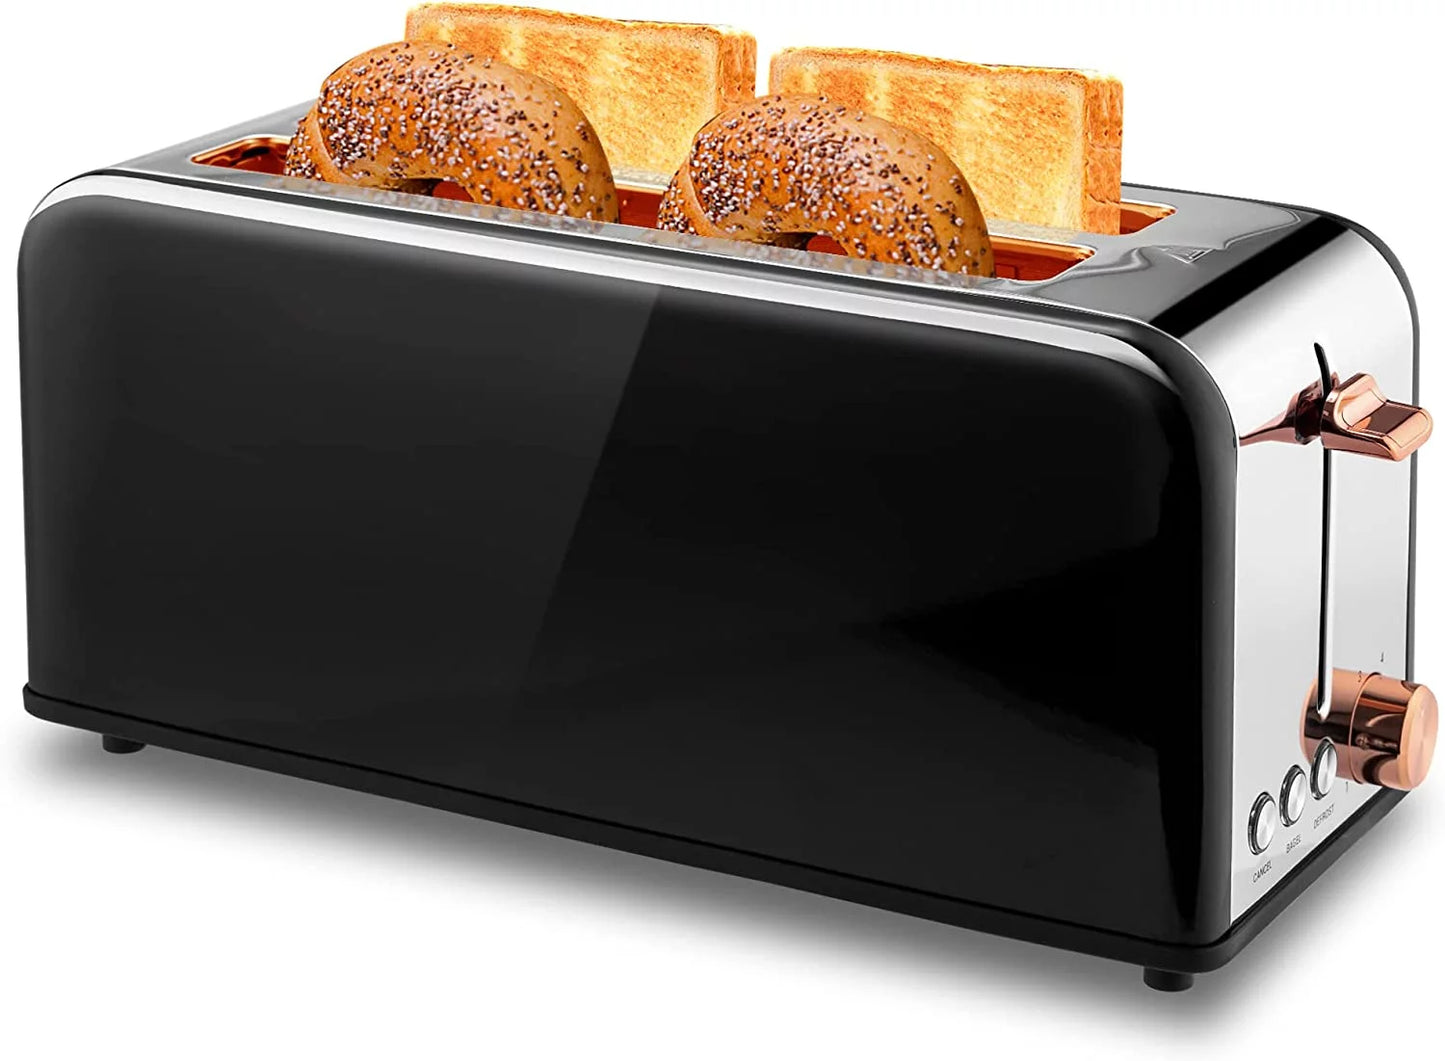 Susteas Stainless Steel Black Toaster 4 Slice Wide Slot, 2 Long Slot Toaster, 6 Browning Levels (1500W)